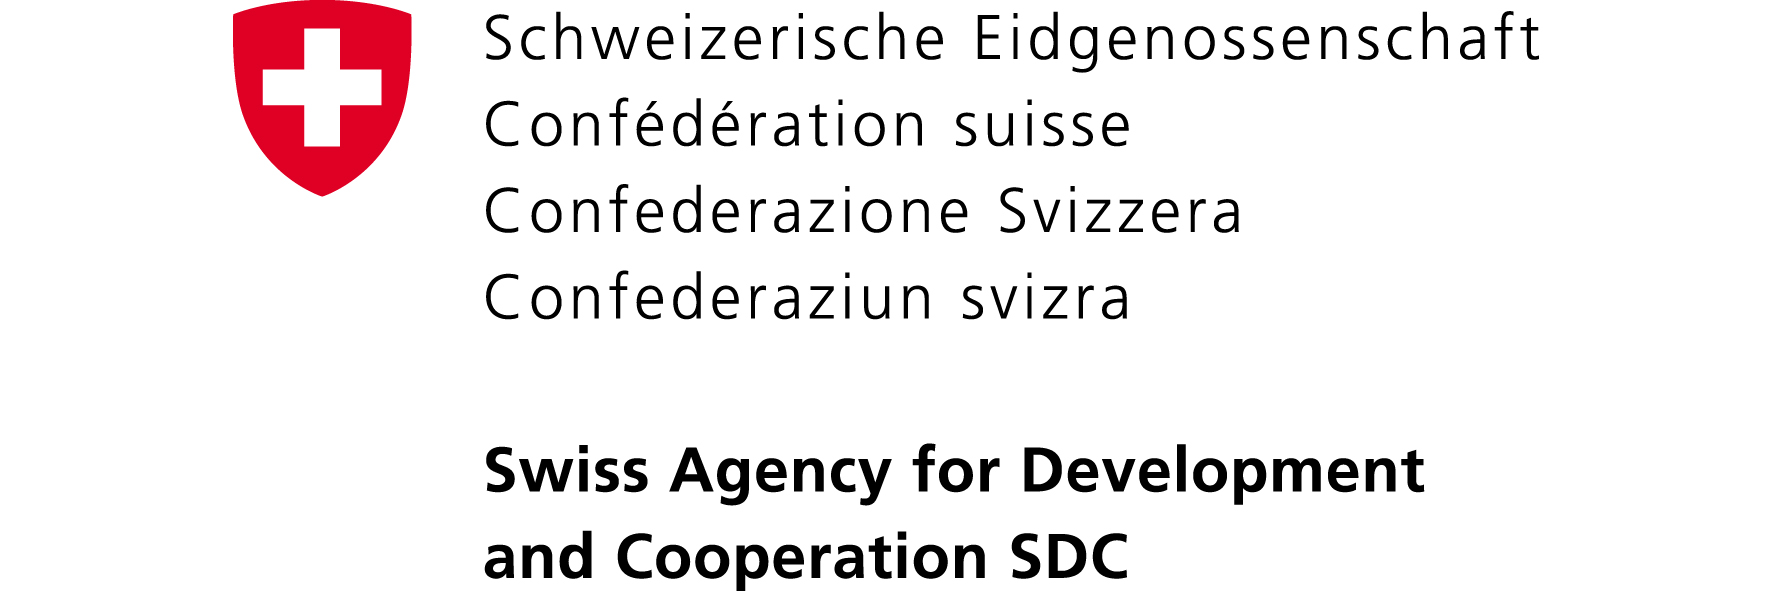 Swiss Agency for Development and Cooperation SDC - Swiss Water Partnership